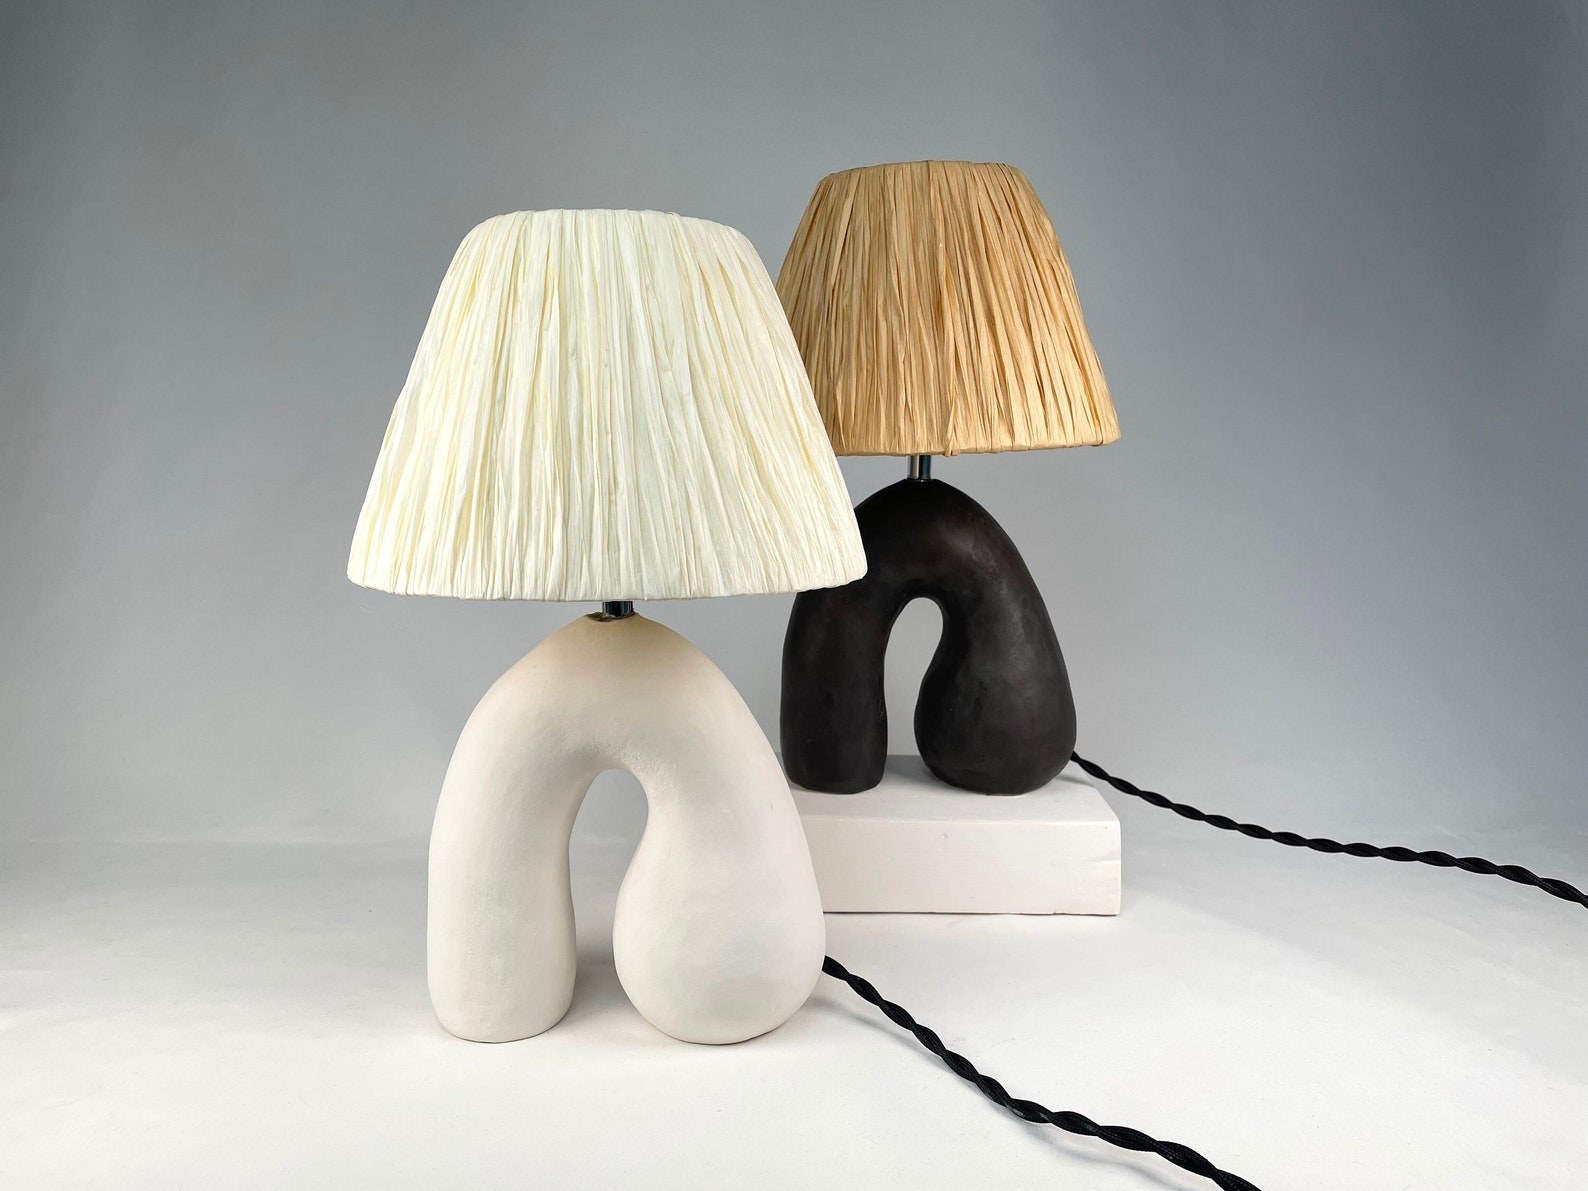 two handmade lamps, one in white base with an ivory shade, and one with a black base with tan shade.